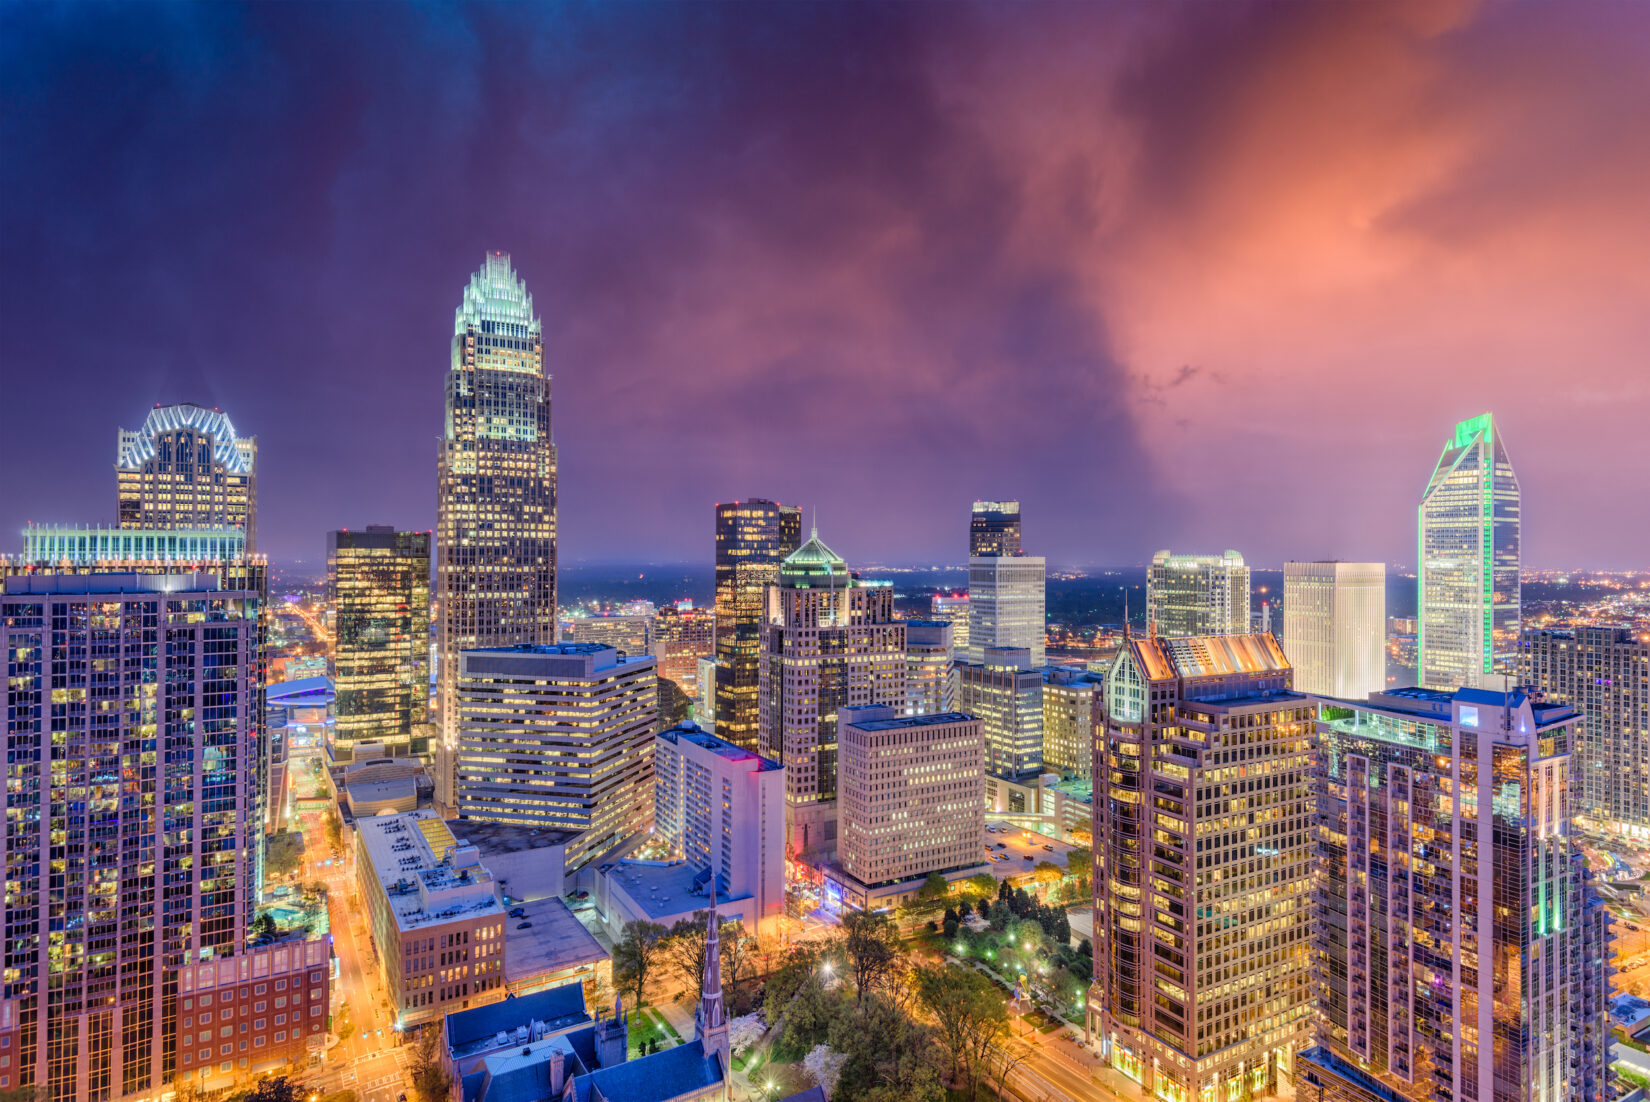 Charlotte, North Carolina city skyscrapers lit up against a colorful and vibrant sky. Charlotte real estate photography by CS3.